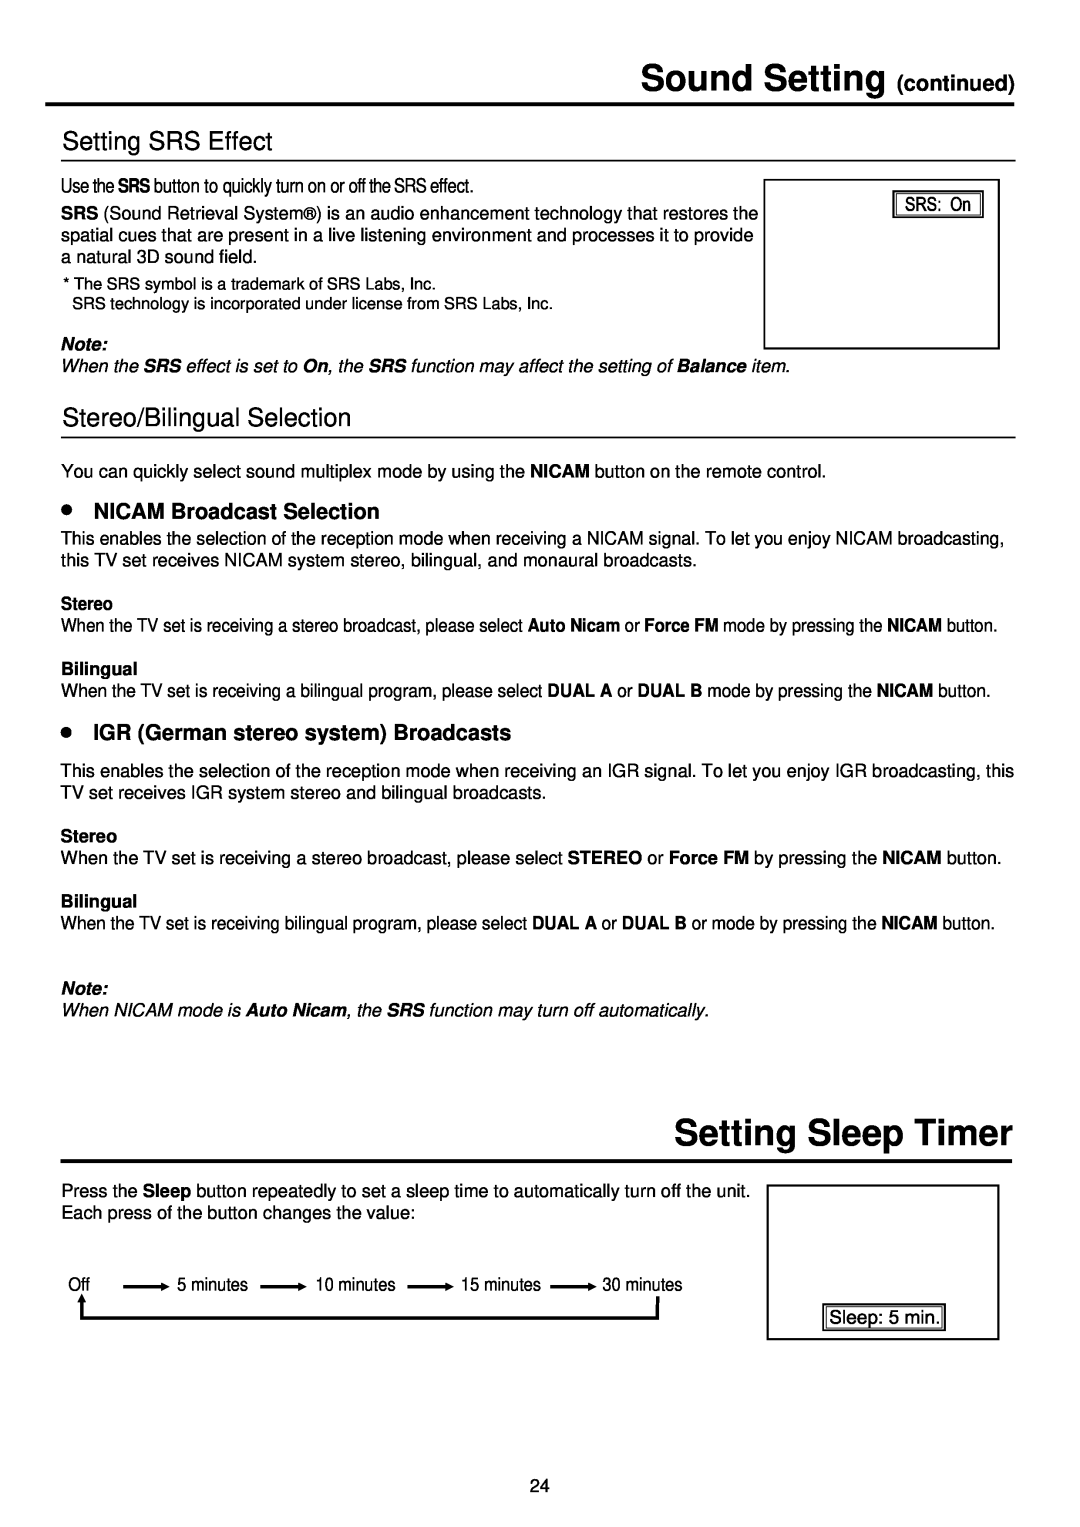 Palsonic TFTV930 owner manual Sound Setting continued, Setting Sleep Timer, Setting SRS Effect, Stereo/Bilingual Selection 